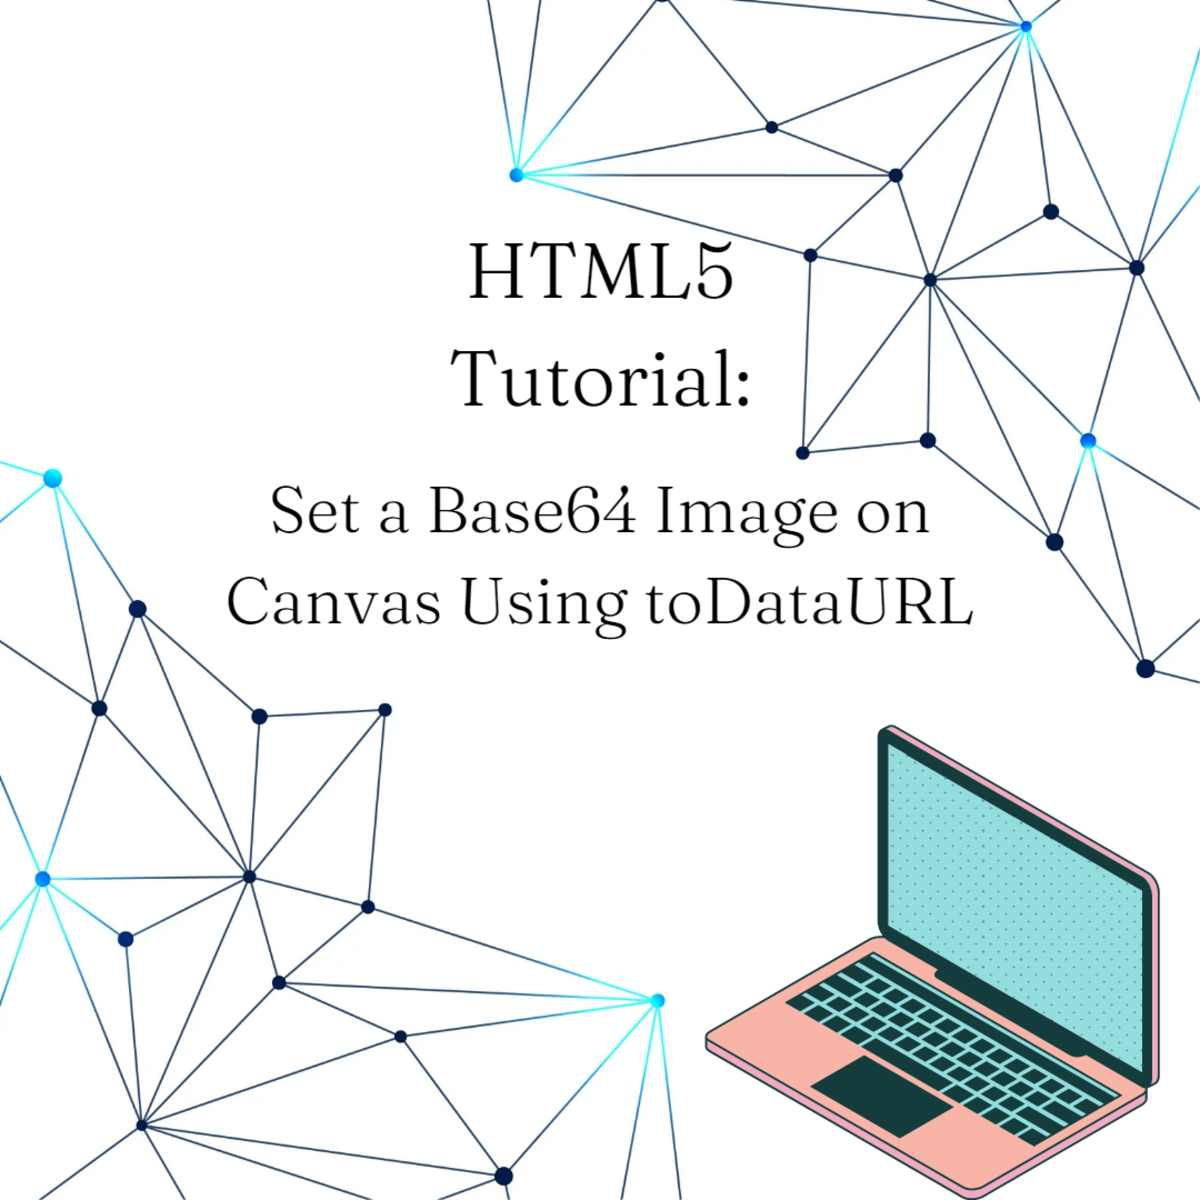 HTML5 Tutorial: How to Get and Set a Base64 Image on Canvas Using toDataURL